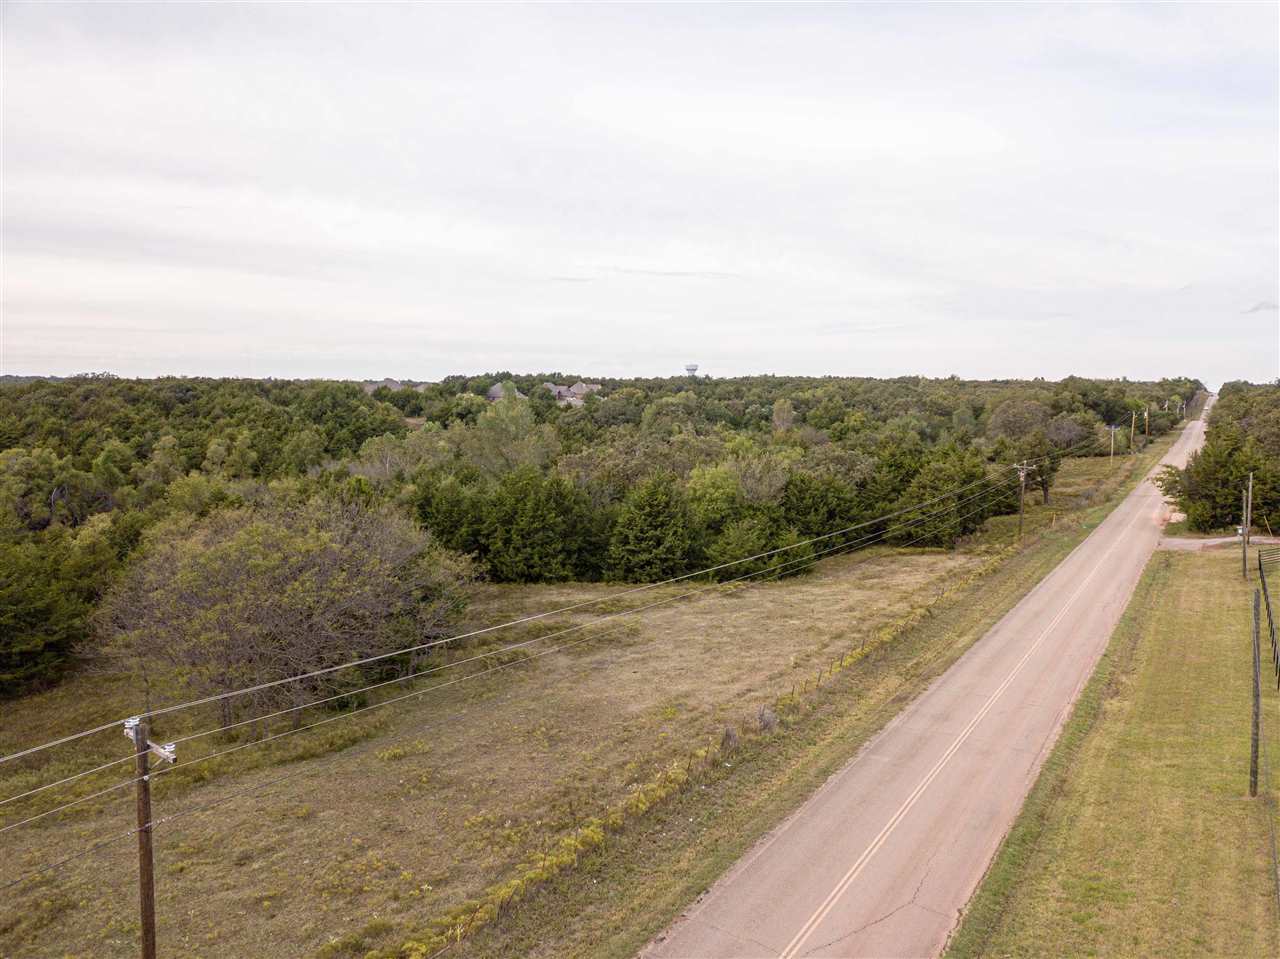 Location, location, location. This fantastic 32.17 acres now available with endless possibilities for this piece of land and pave road access in SW Stillwater. Whether you want to build, have a place for cattle/horses or just enjoy having land, do not miss your opportunity. This property is located on S Country Club Road, between 44th and 56th, south of Red Rose Valley. Stillwater Schools District. The property has already been surveyed with pins set. The land is a combination of pasture land and trees. 5 strand fencing on majority of property. Utilities are along Country Club Road. Call for your private showing today!